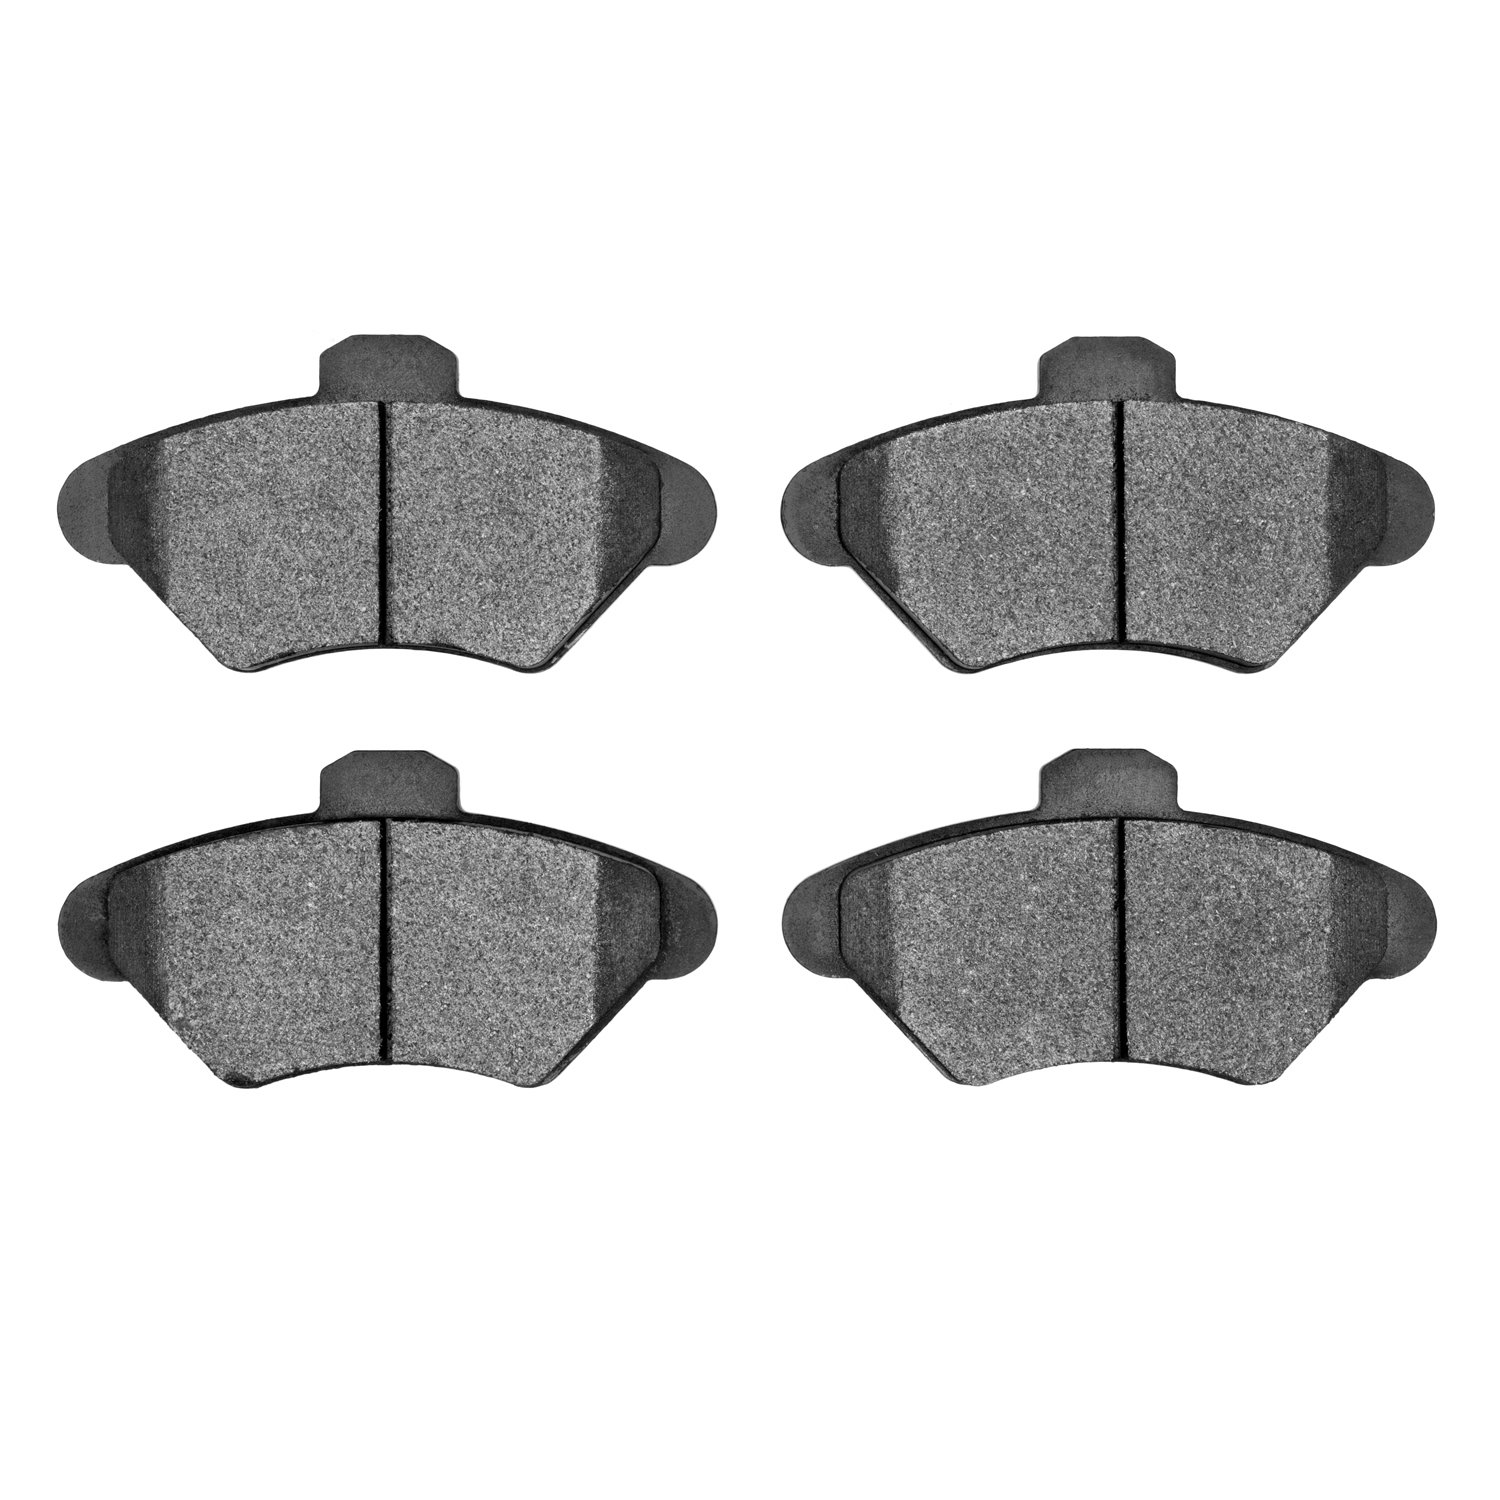 1551-0600-00 5000 Advanced Low-Metallic Brake Pads, 1993-1997 Ford/Lincoln/Mercury/Mazda, Position: Front